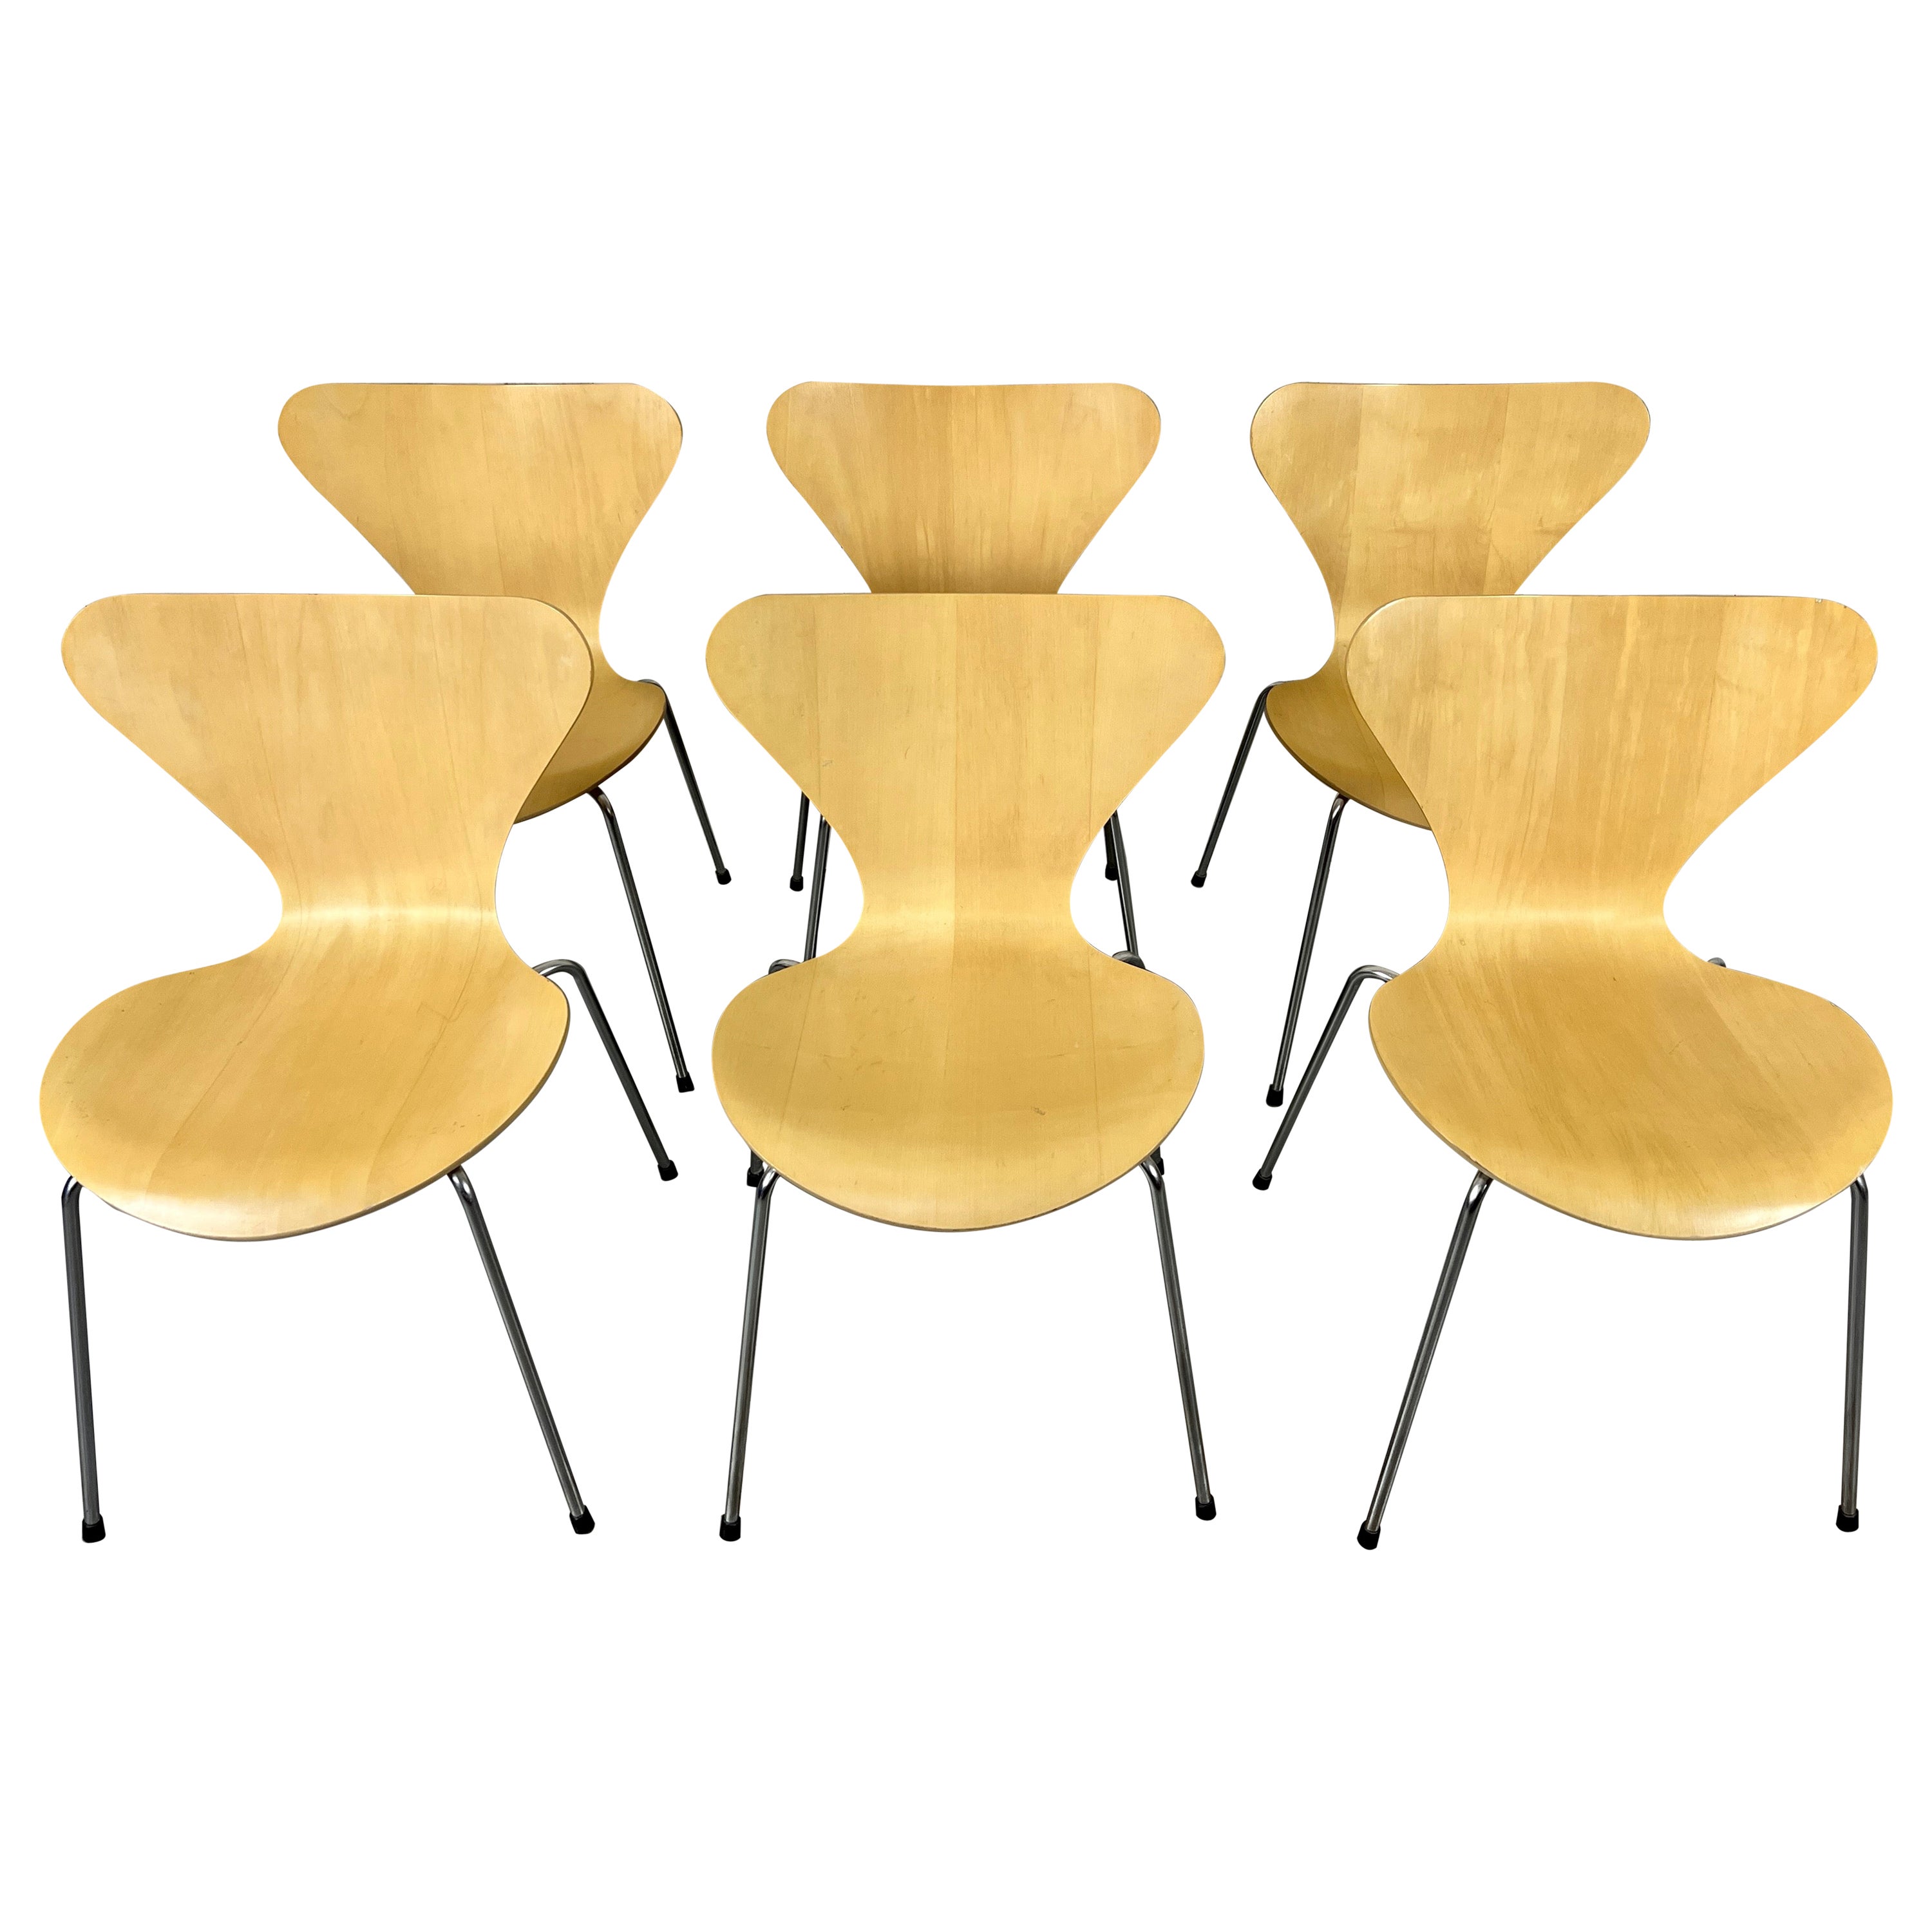 Arne Jacobsen Series 7 Stackable Chairs for Fritz Hansen For Sale